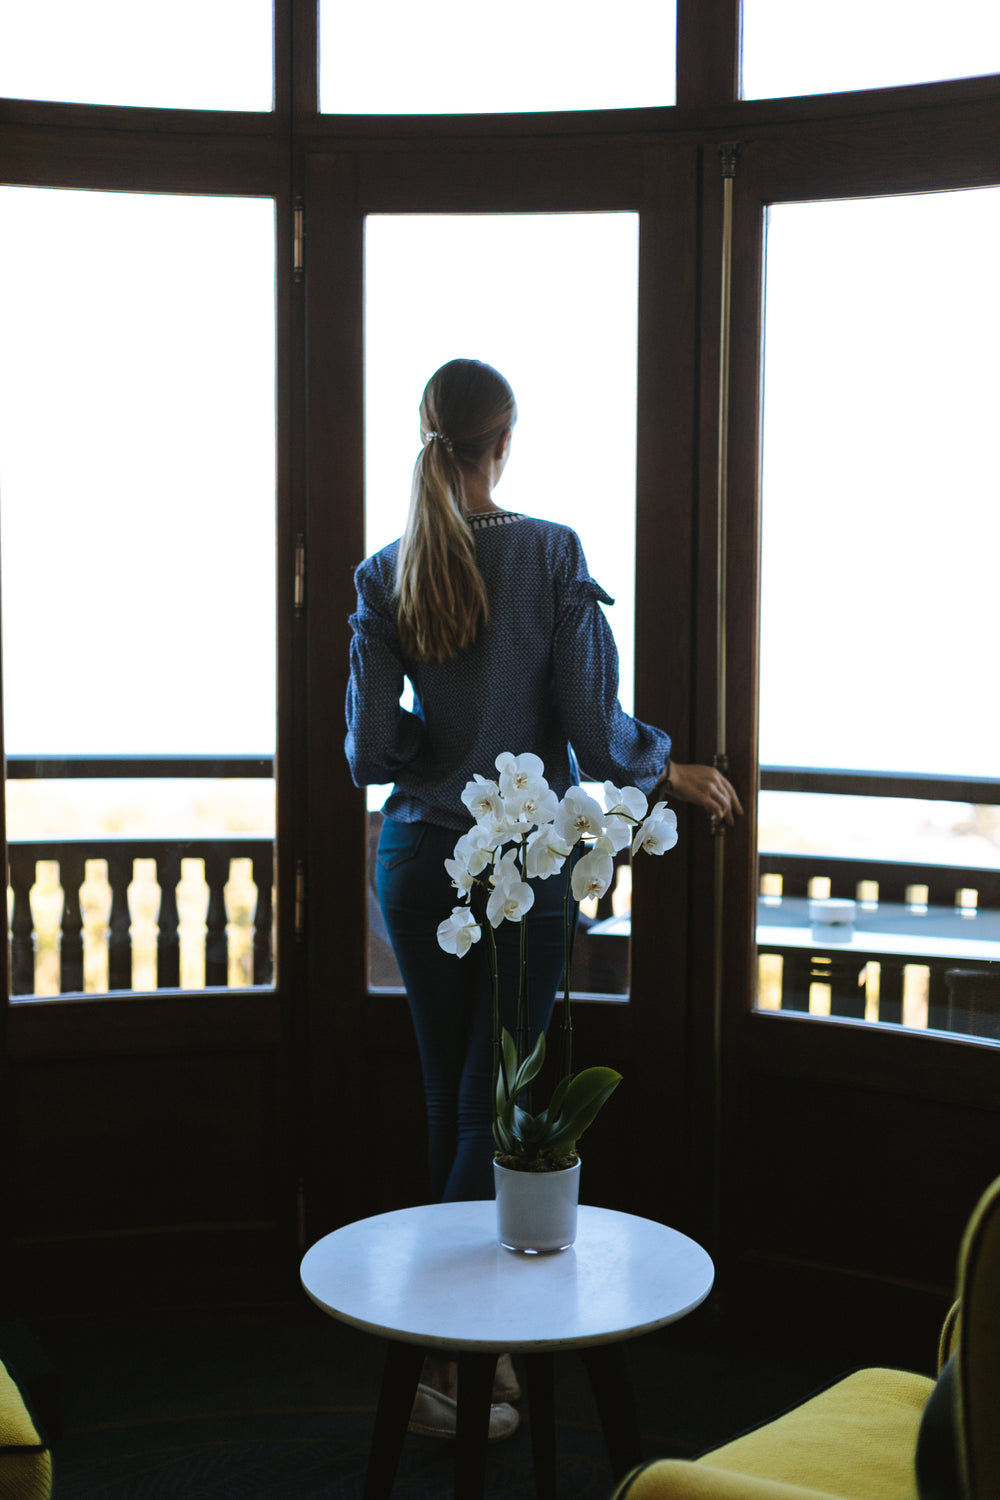 orchid decor and woman enjoying view